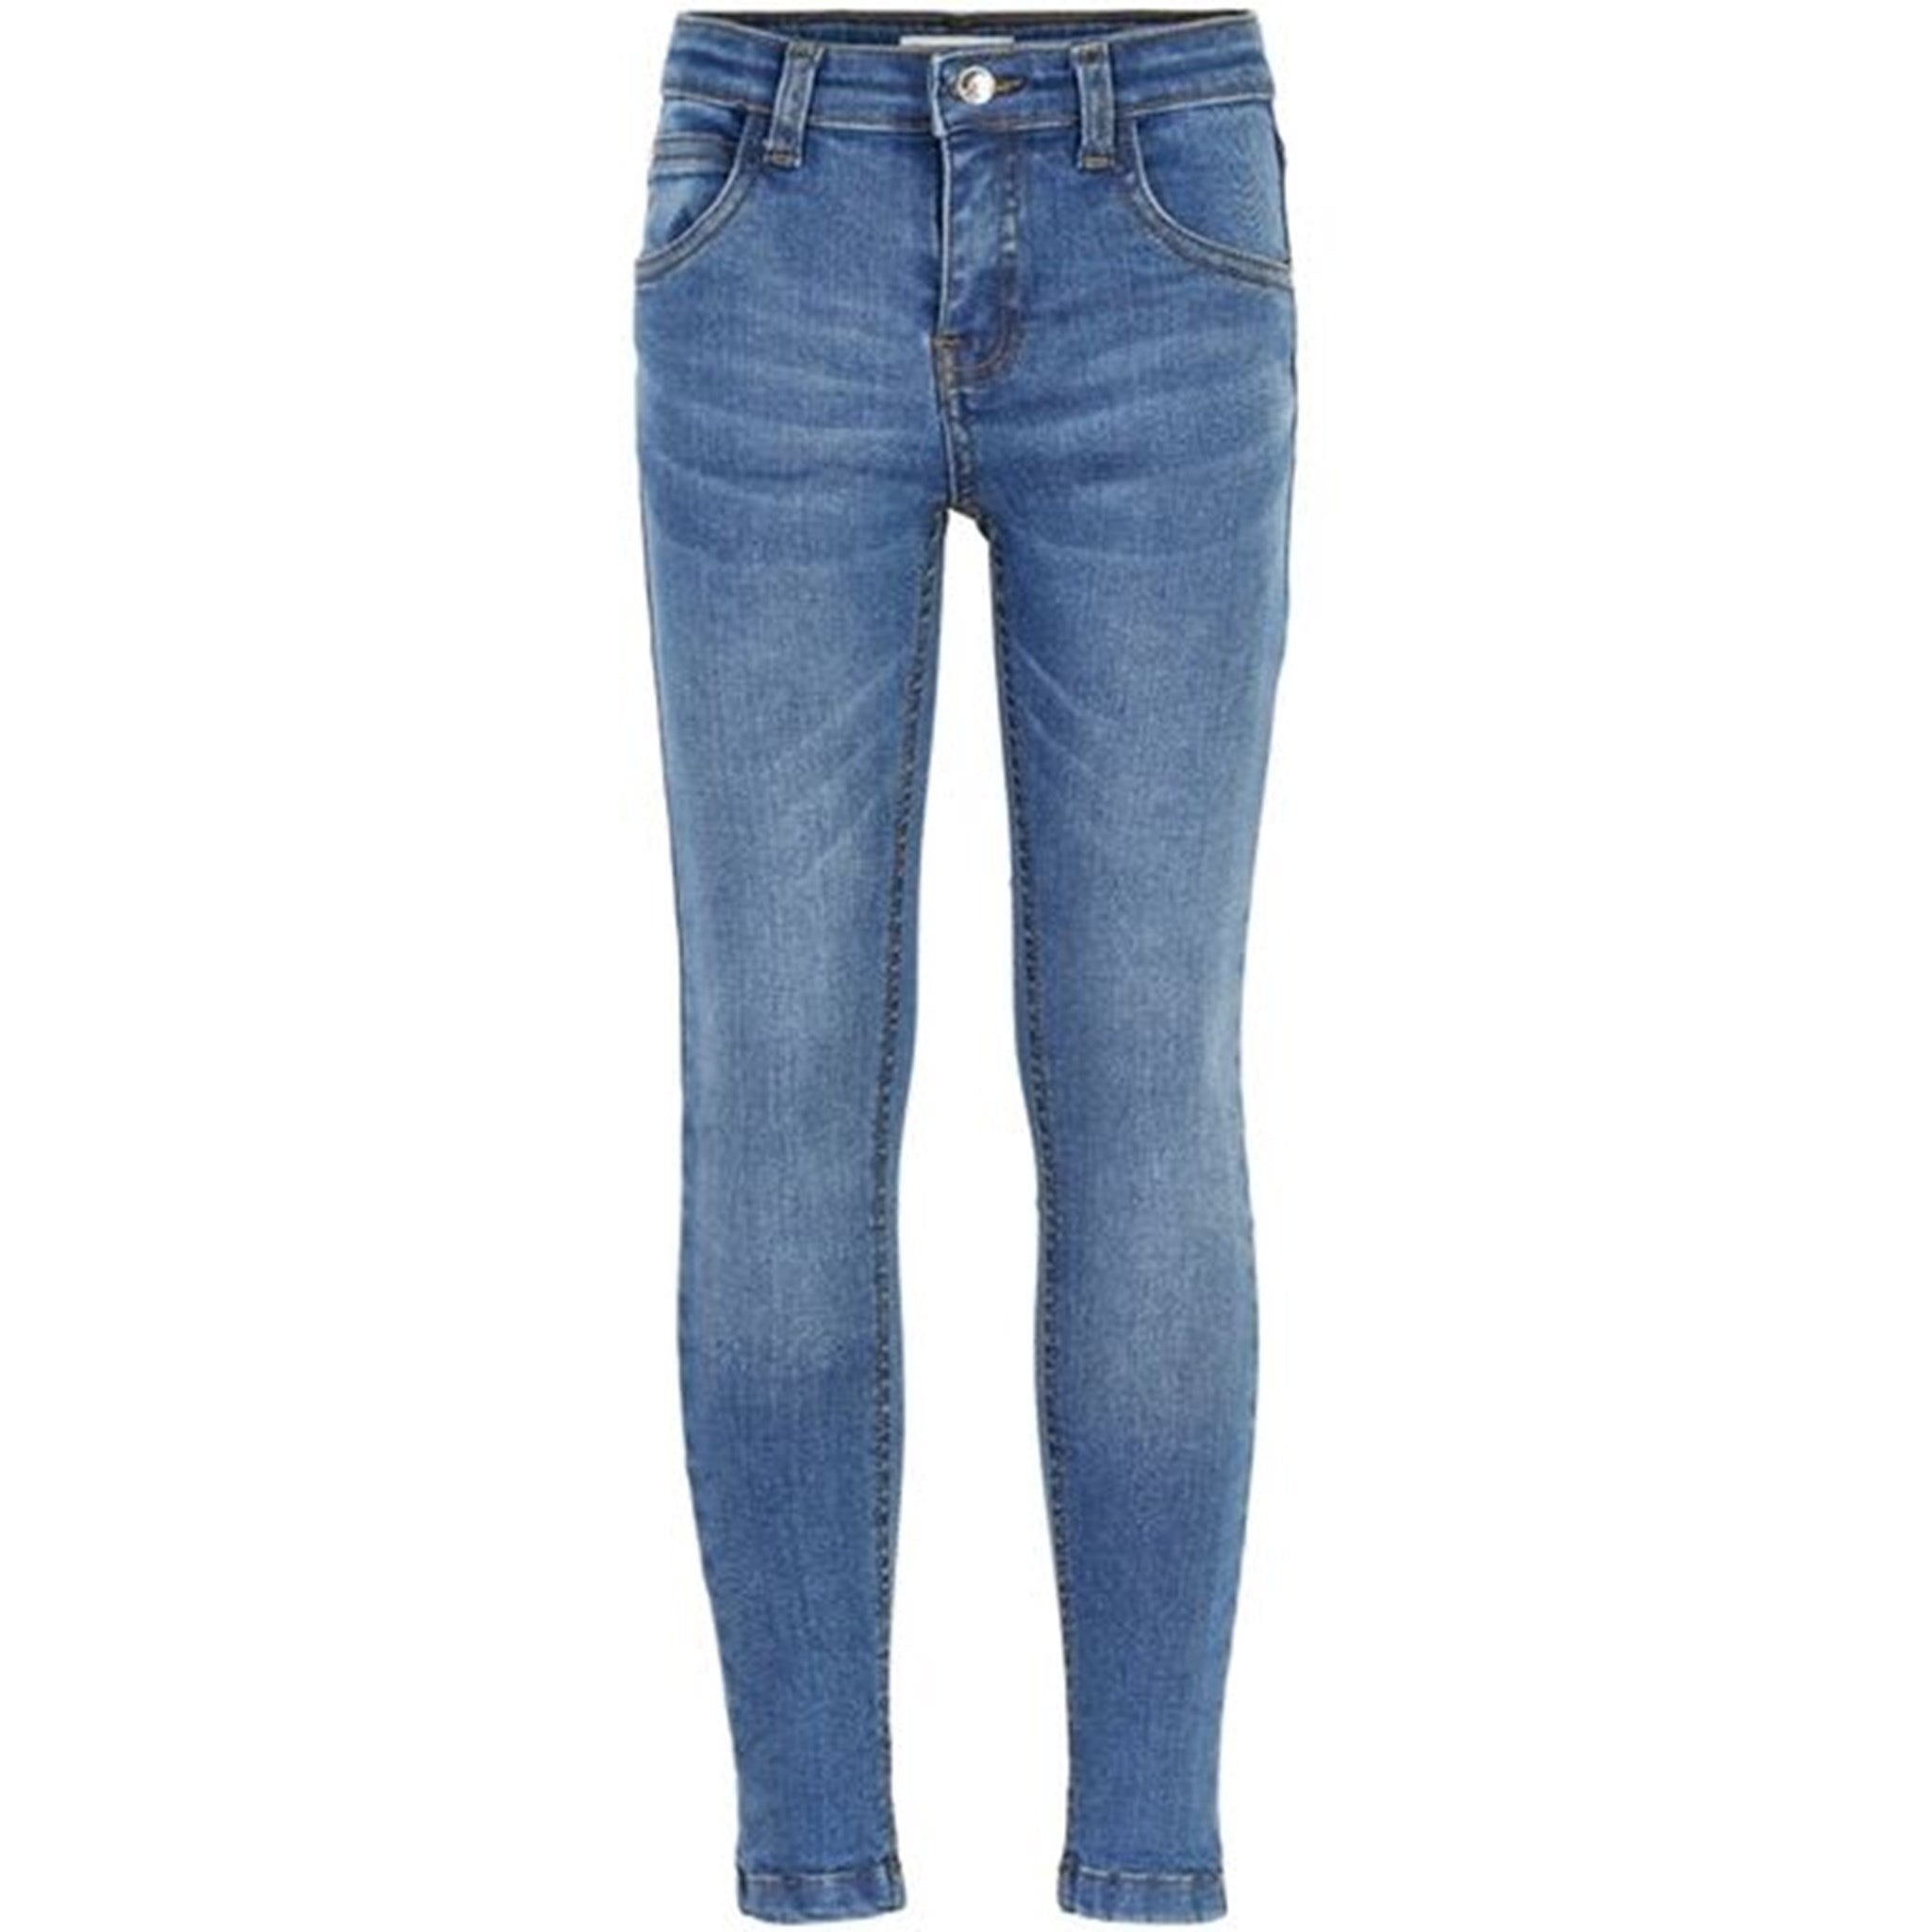 The New Oslo Super Slim Jeans Med Blue